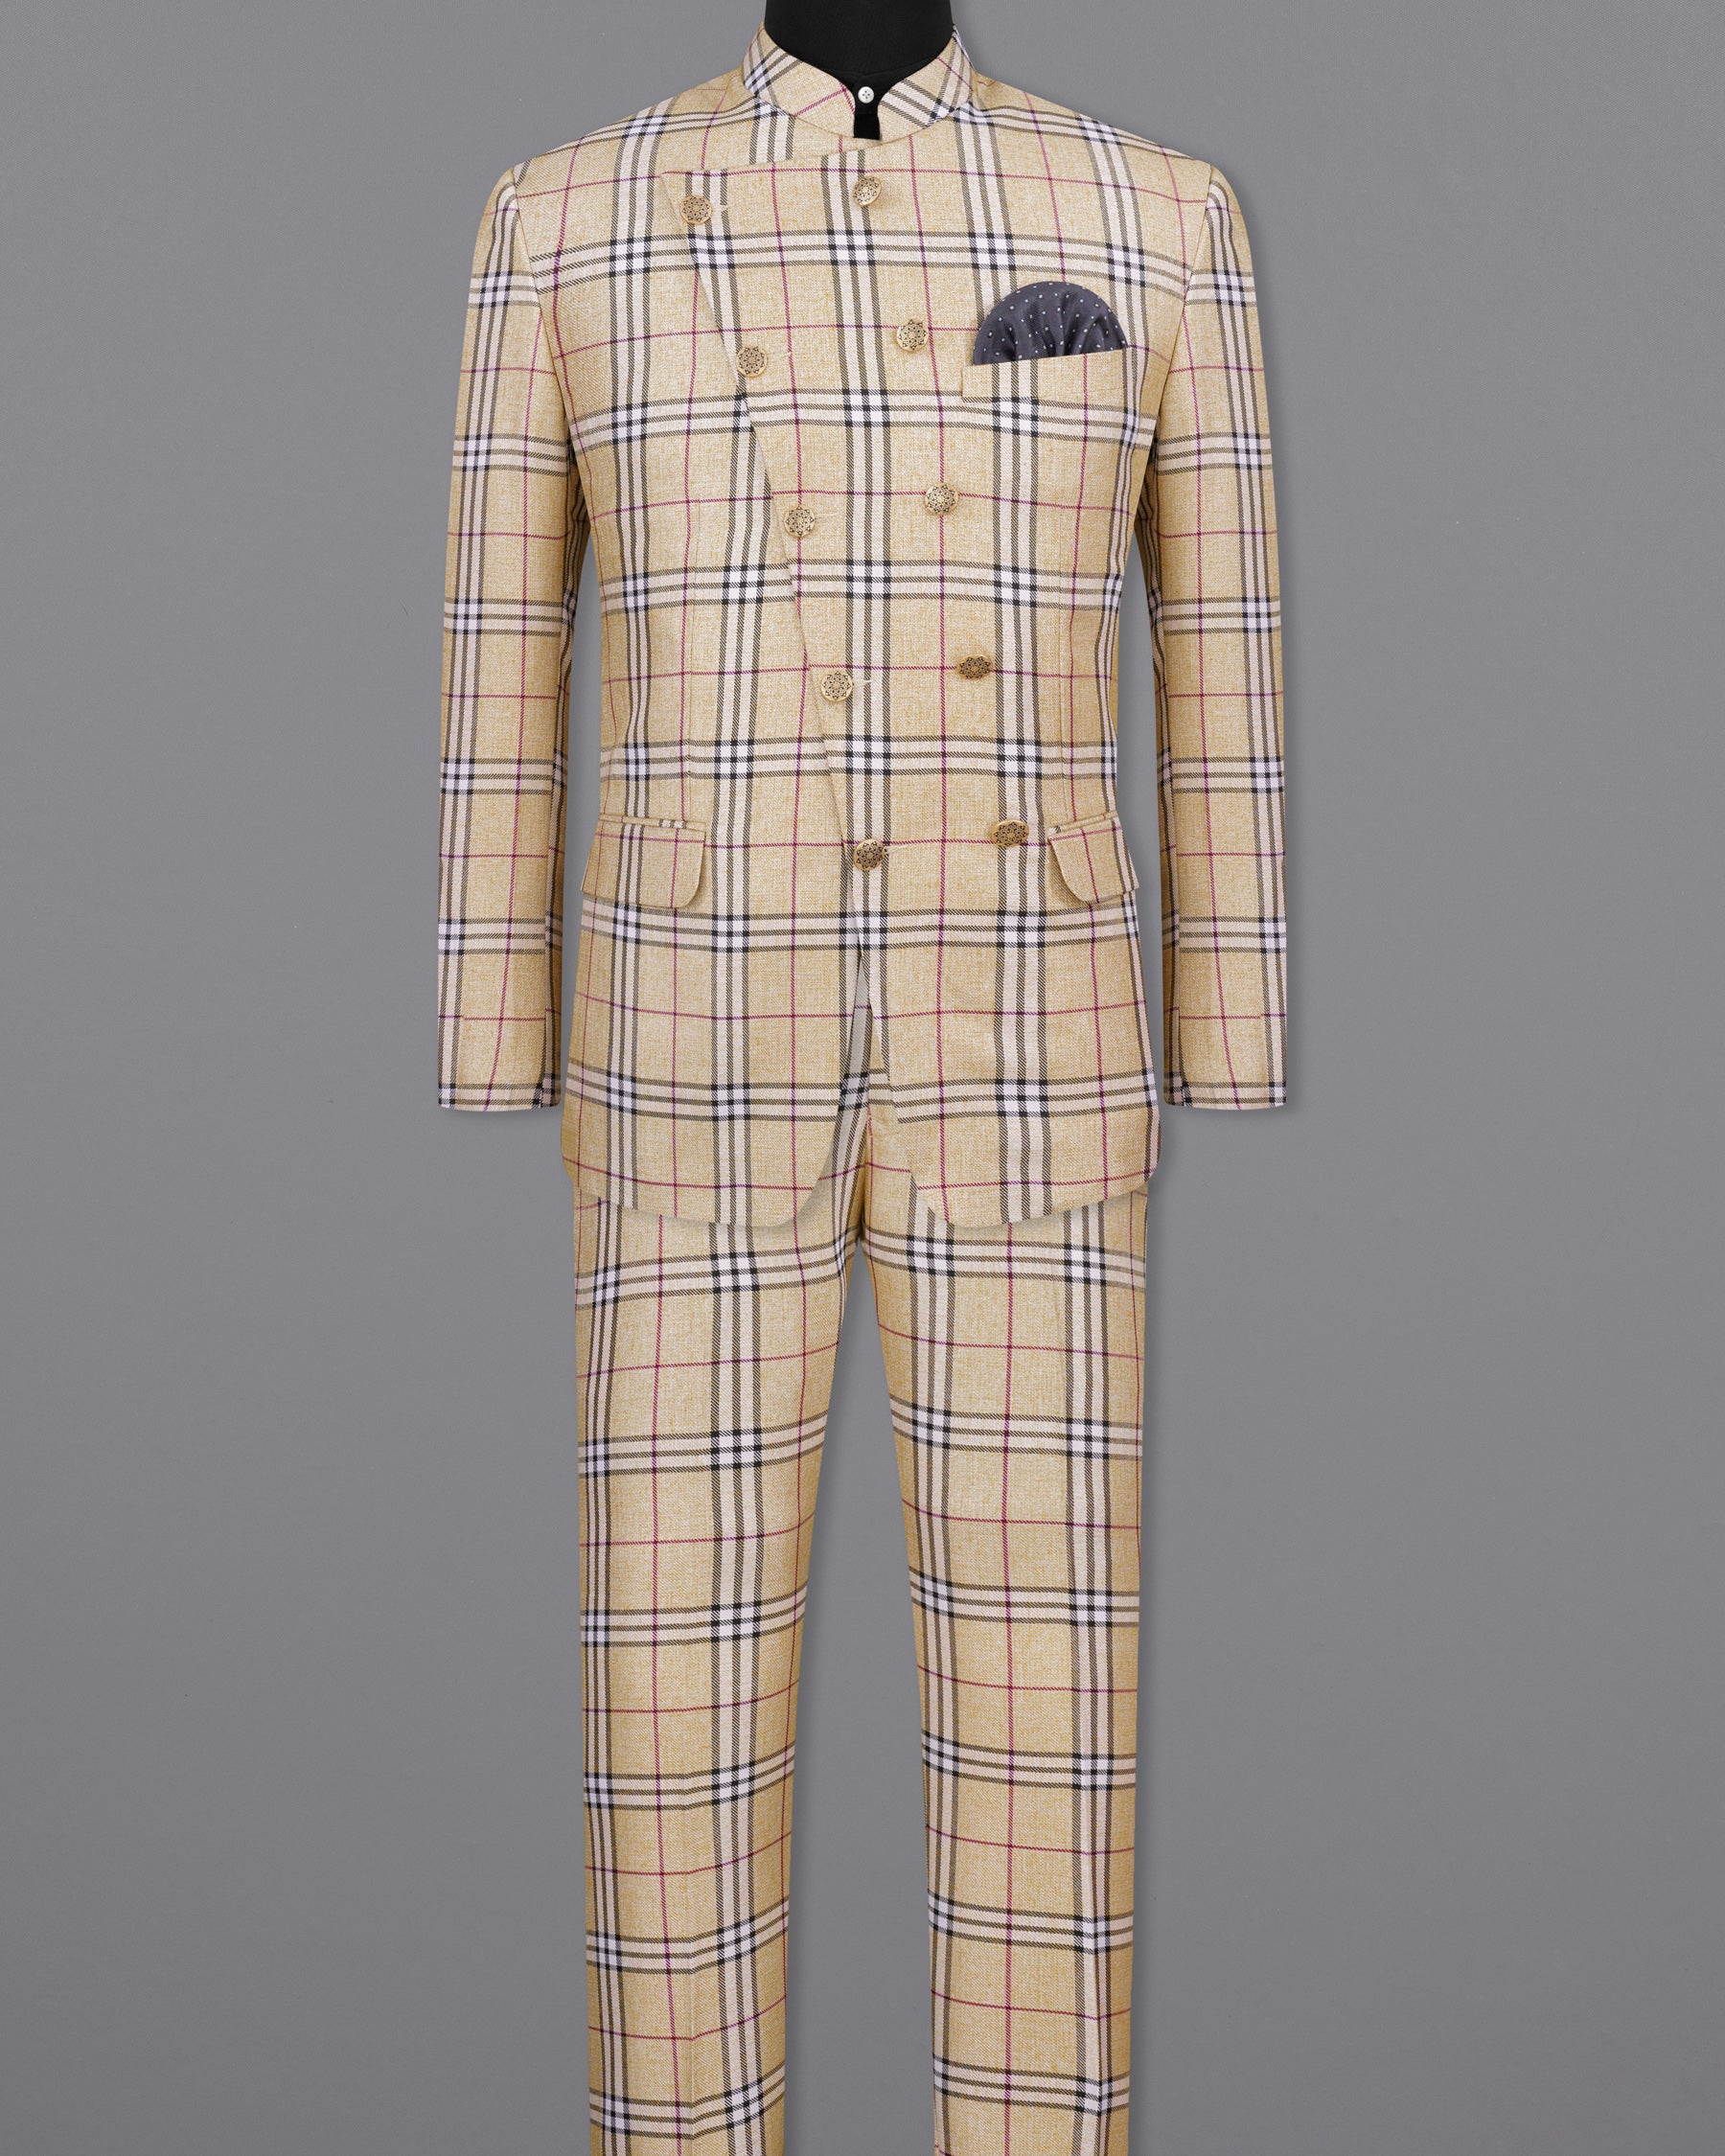 Sorrell Brown with Acadia Black Plaid Cross Placket Bandhgala Suit